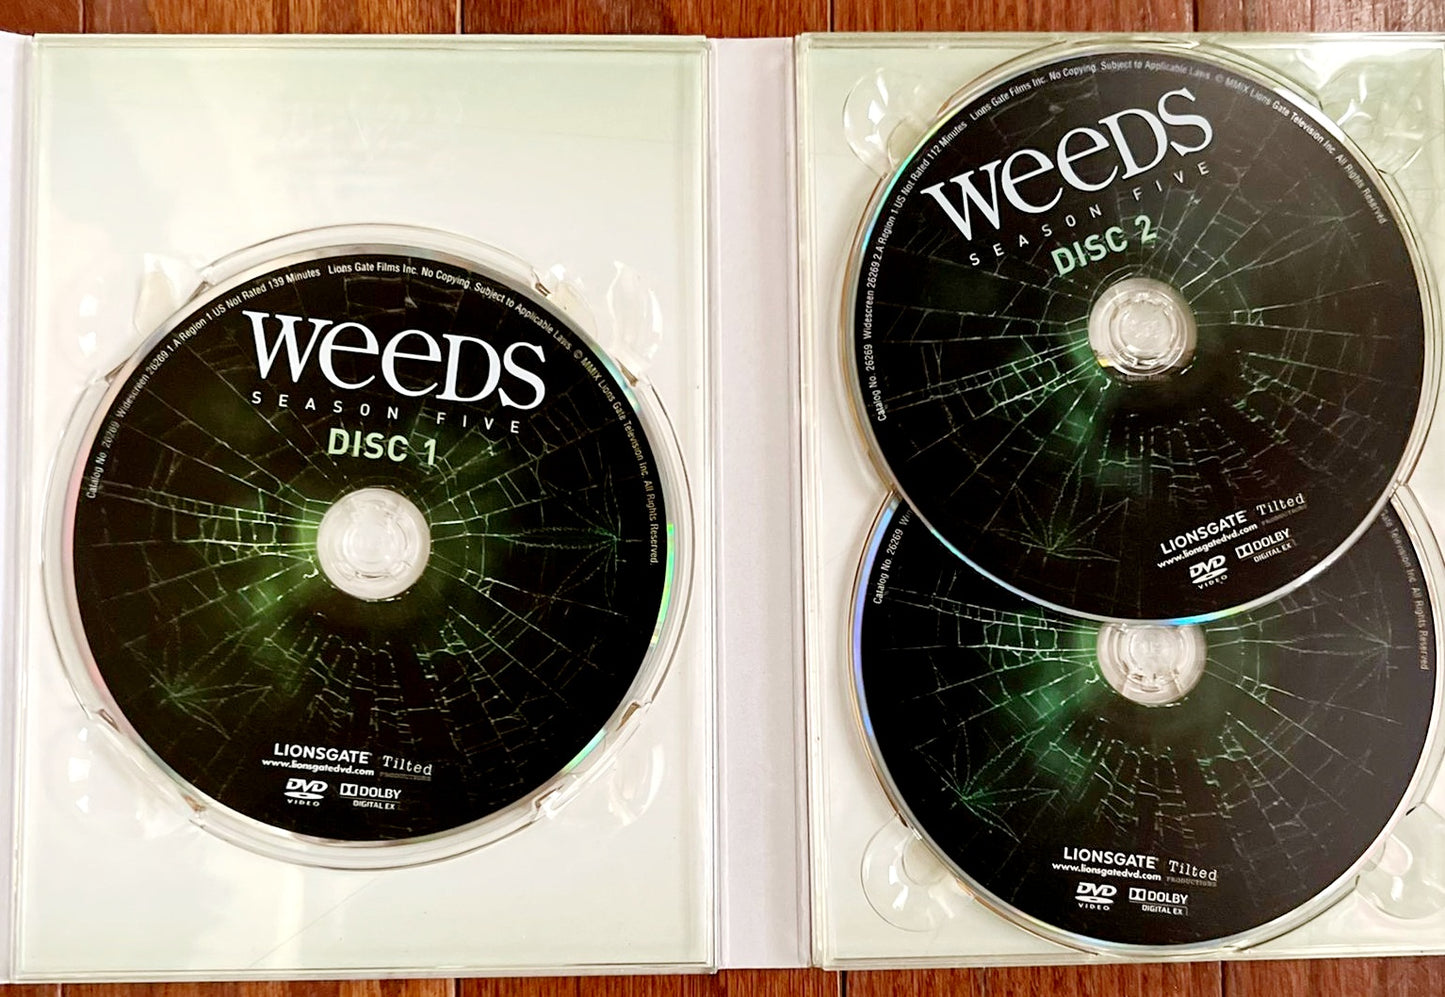 'WEEDS' *The Complete 5th Season on DVD